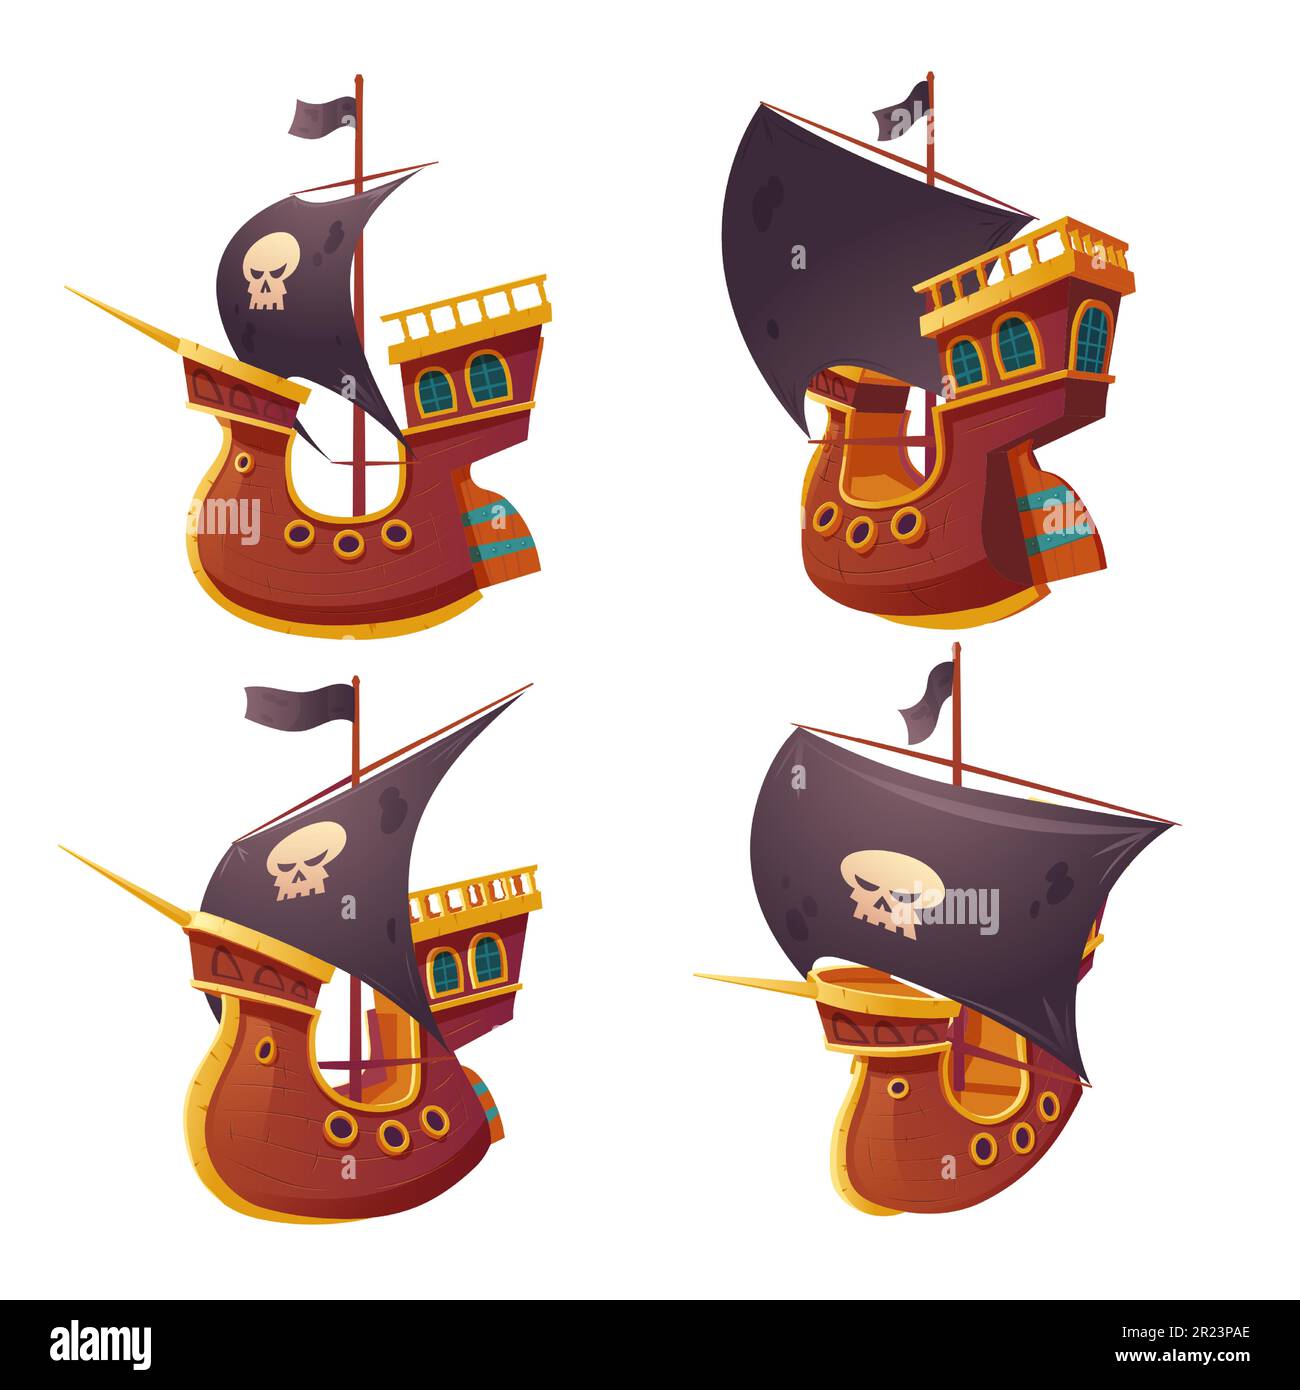 Pirate ship set isolated on white background. Wooden boat with black sails, cannon holes and sailyards. Corvette or frigate with buccaneer flag skull and bones. Old battleship, barge cartoon vector Stock Vector